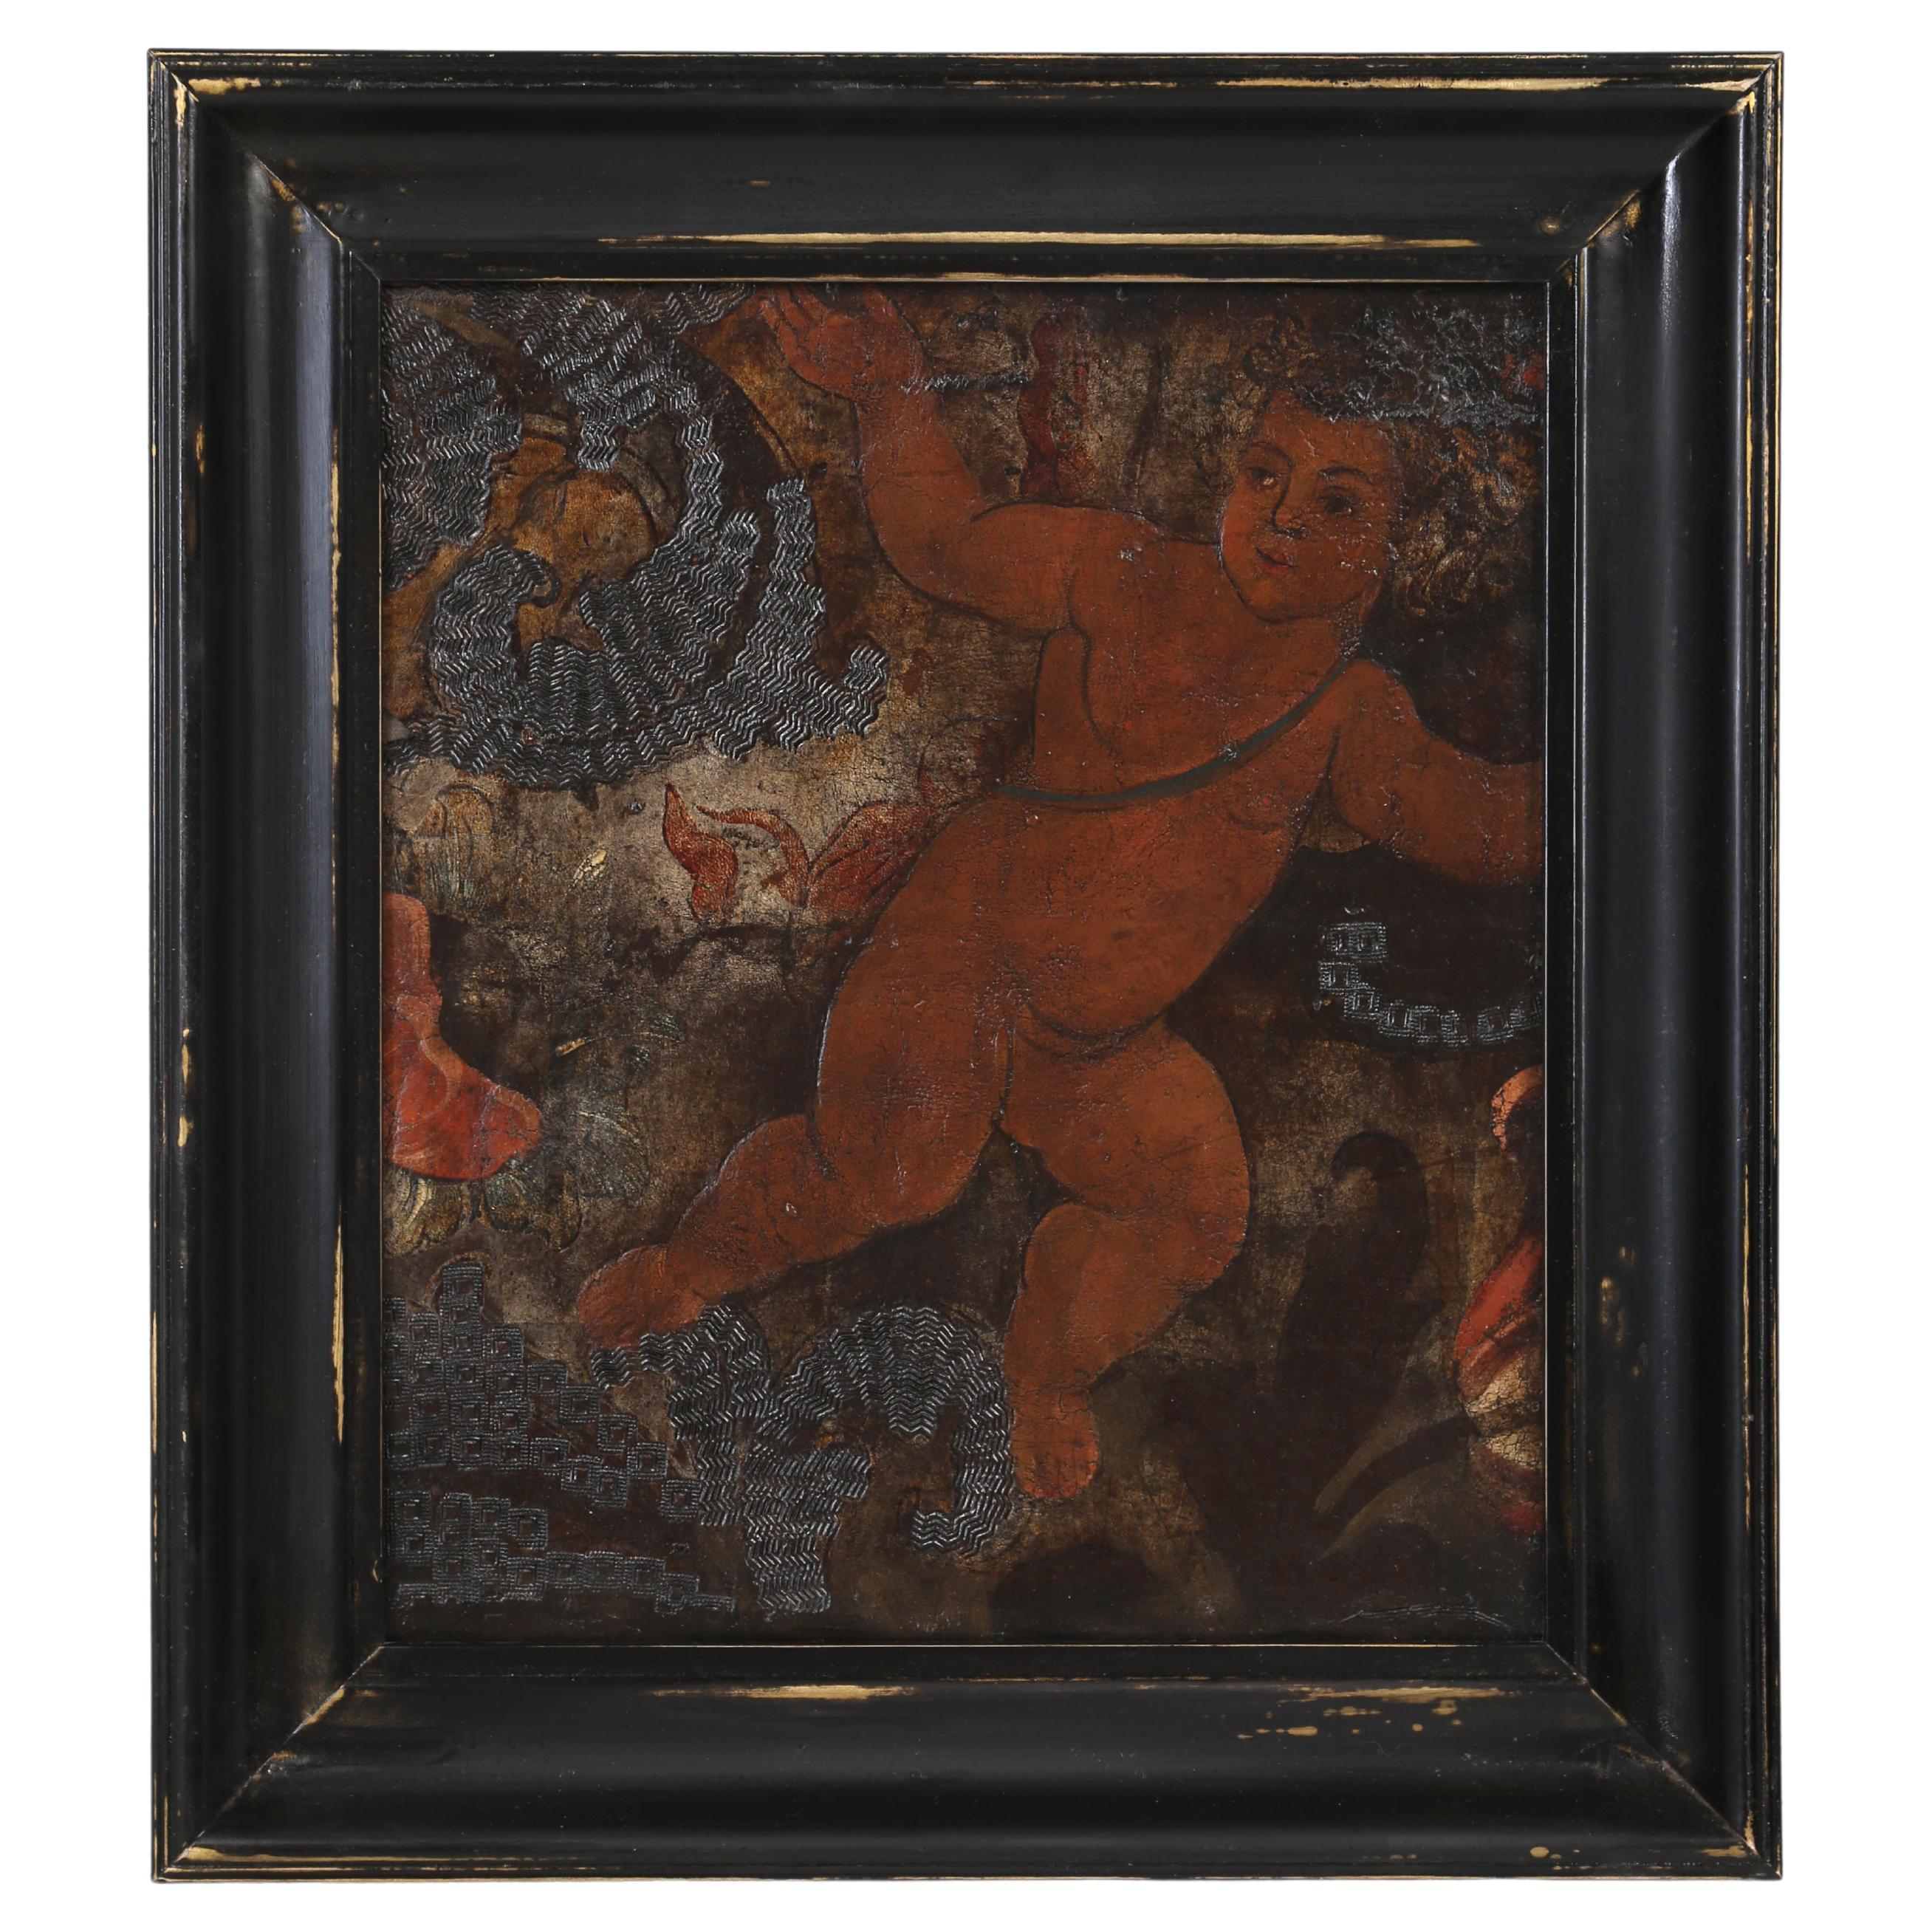 Oil Painting on Tooled Leather of a Putti or Cherub Male Child from Spain 17th C